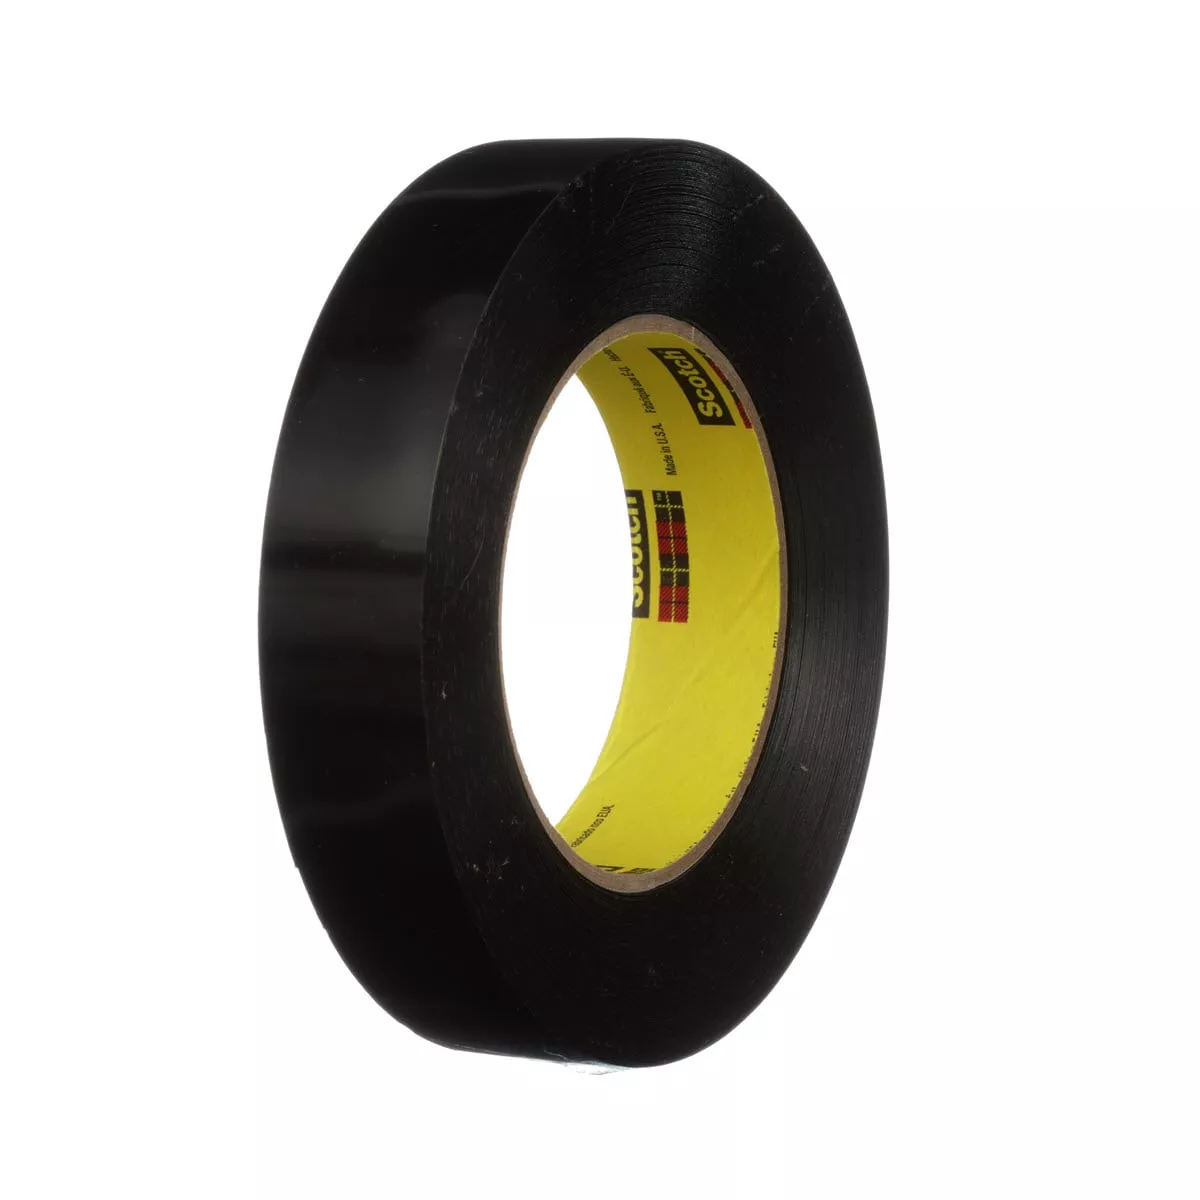 3M™ Preservation Sealing Tape 481, Black, 1 in x 36 yd, 9.5 mil, 36
Roll/Case